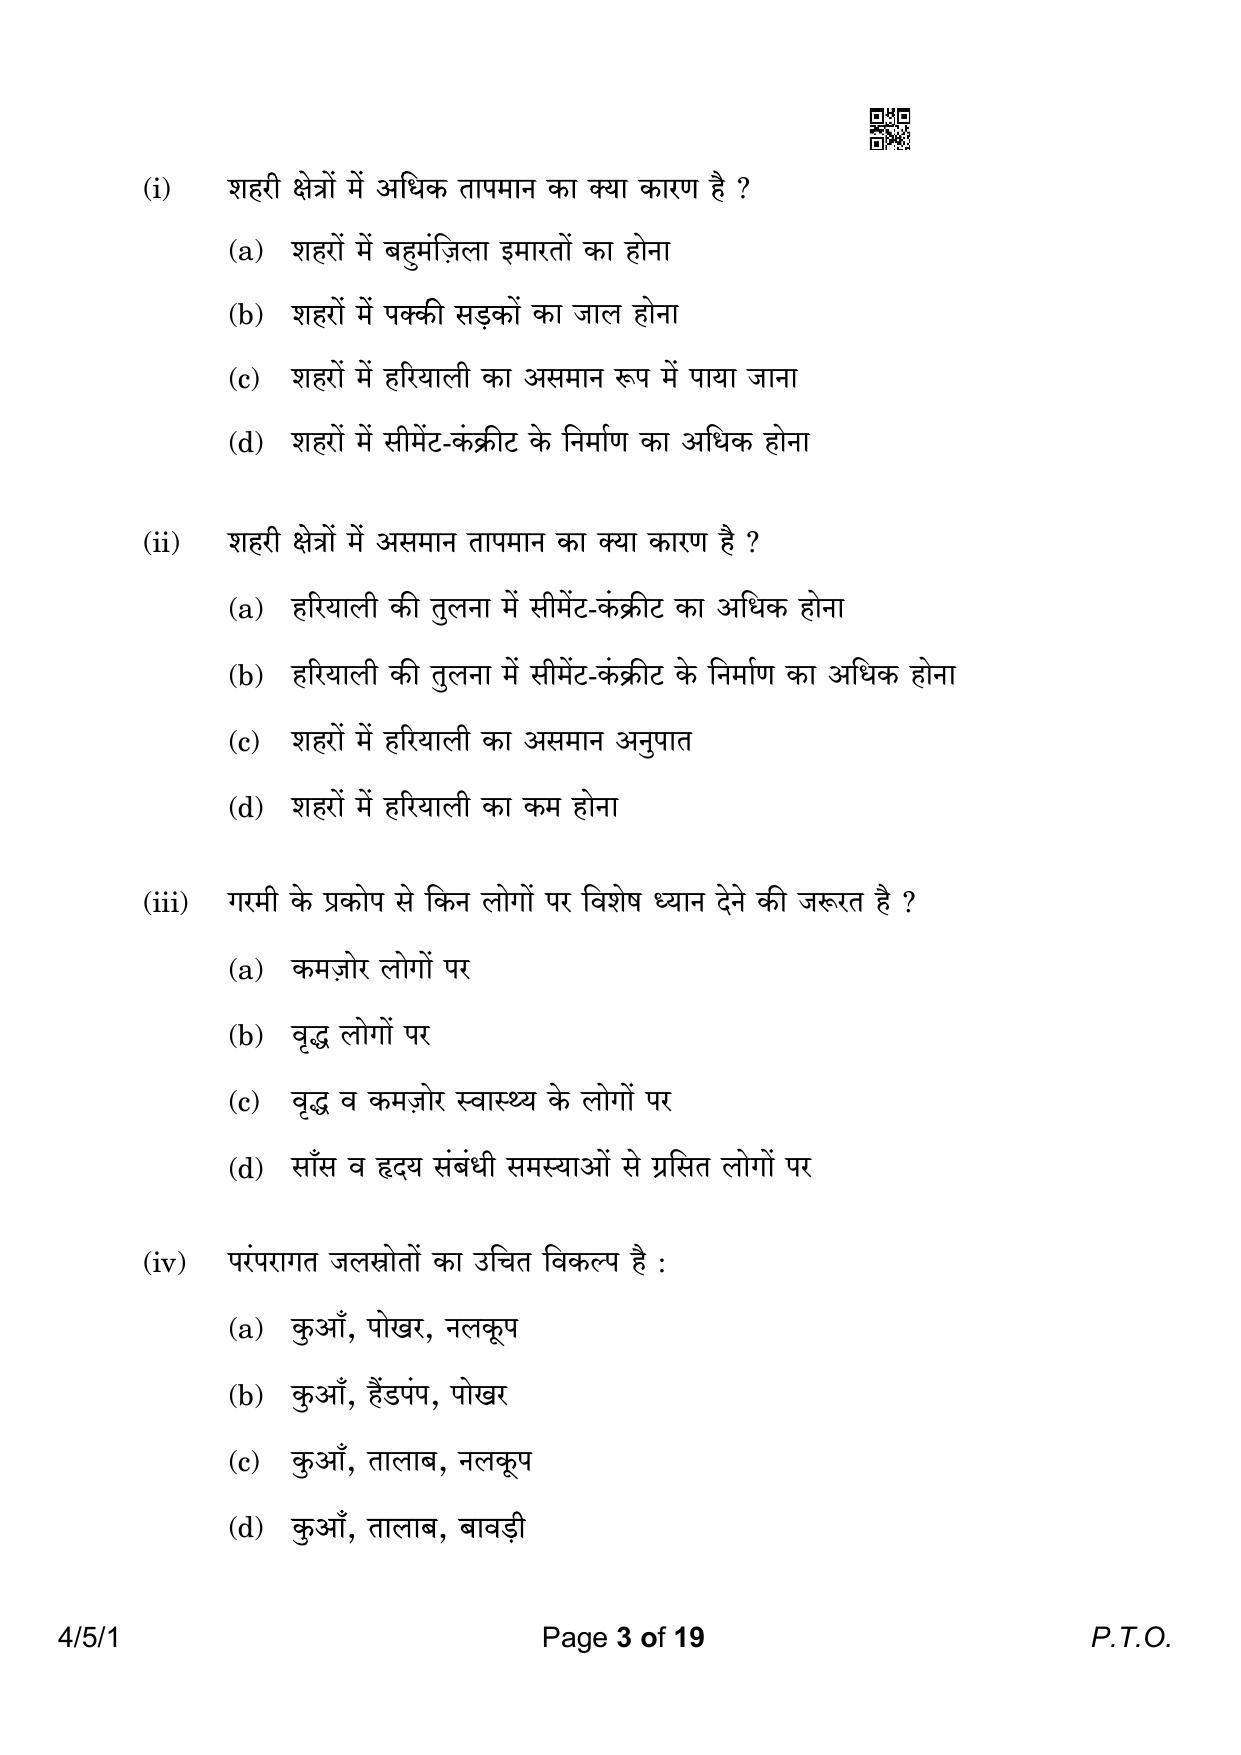 CBSE Class 10 4-5-1 Hindi B 2023 Question Paper - Page 3